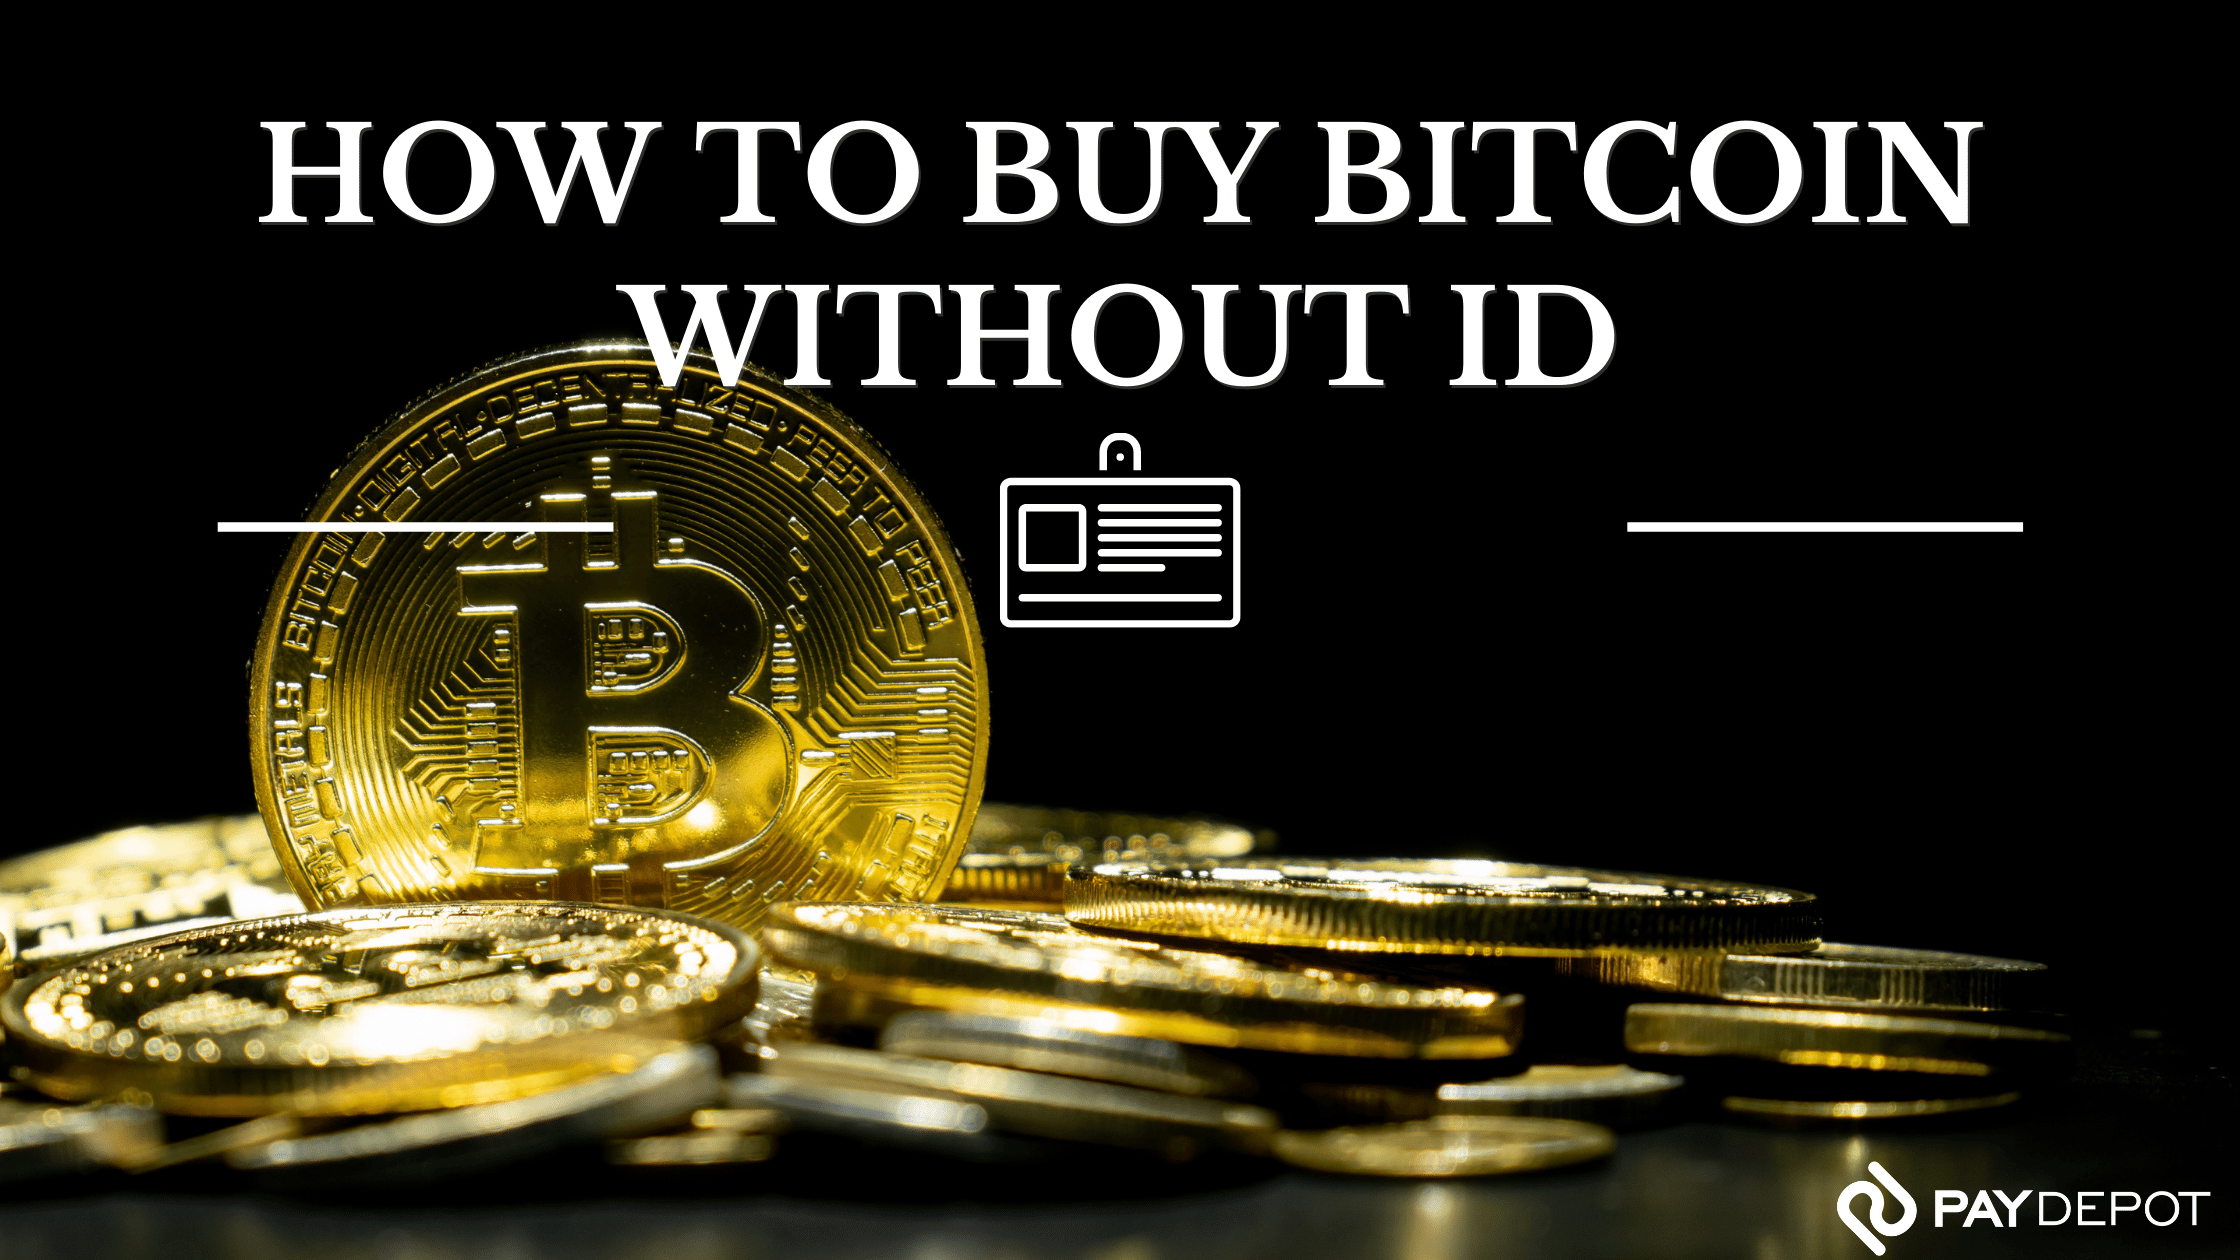 How to Buy Bitcoin Without Verification or ID